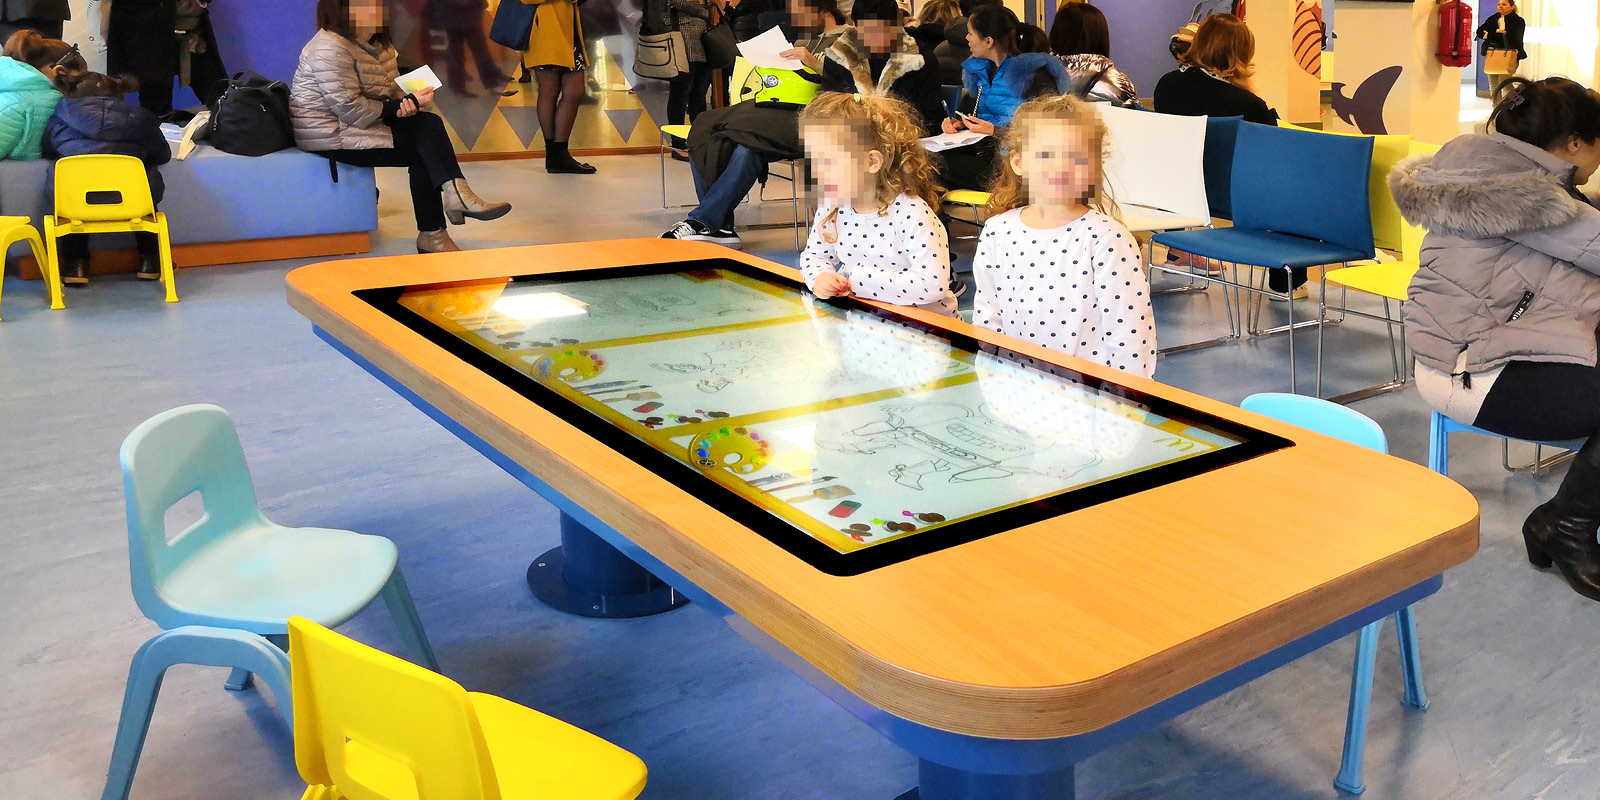 Touchwindow - A child-friendly environment